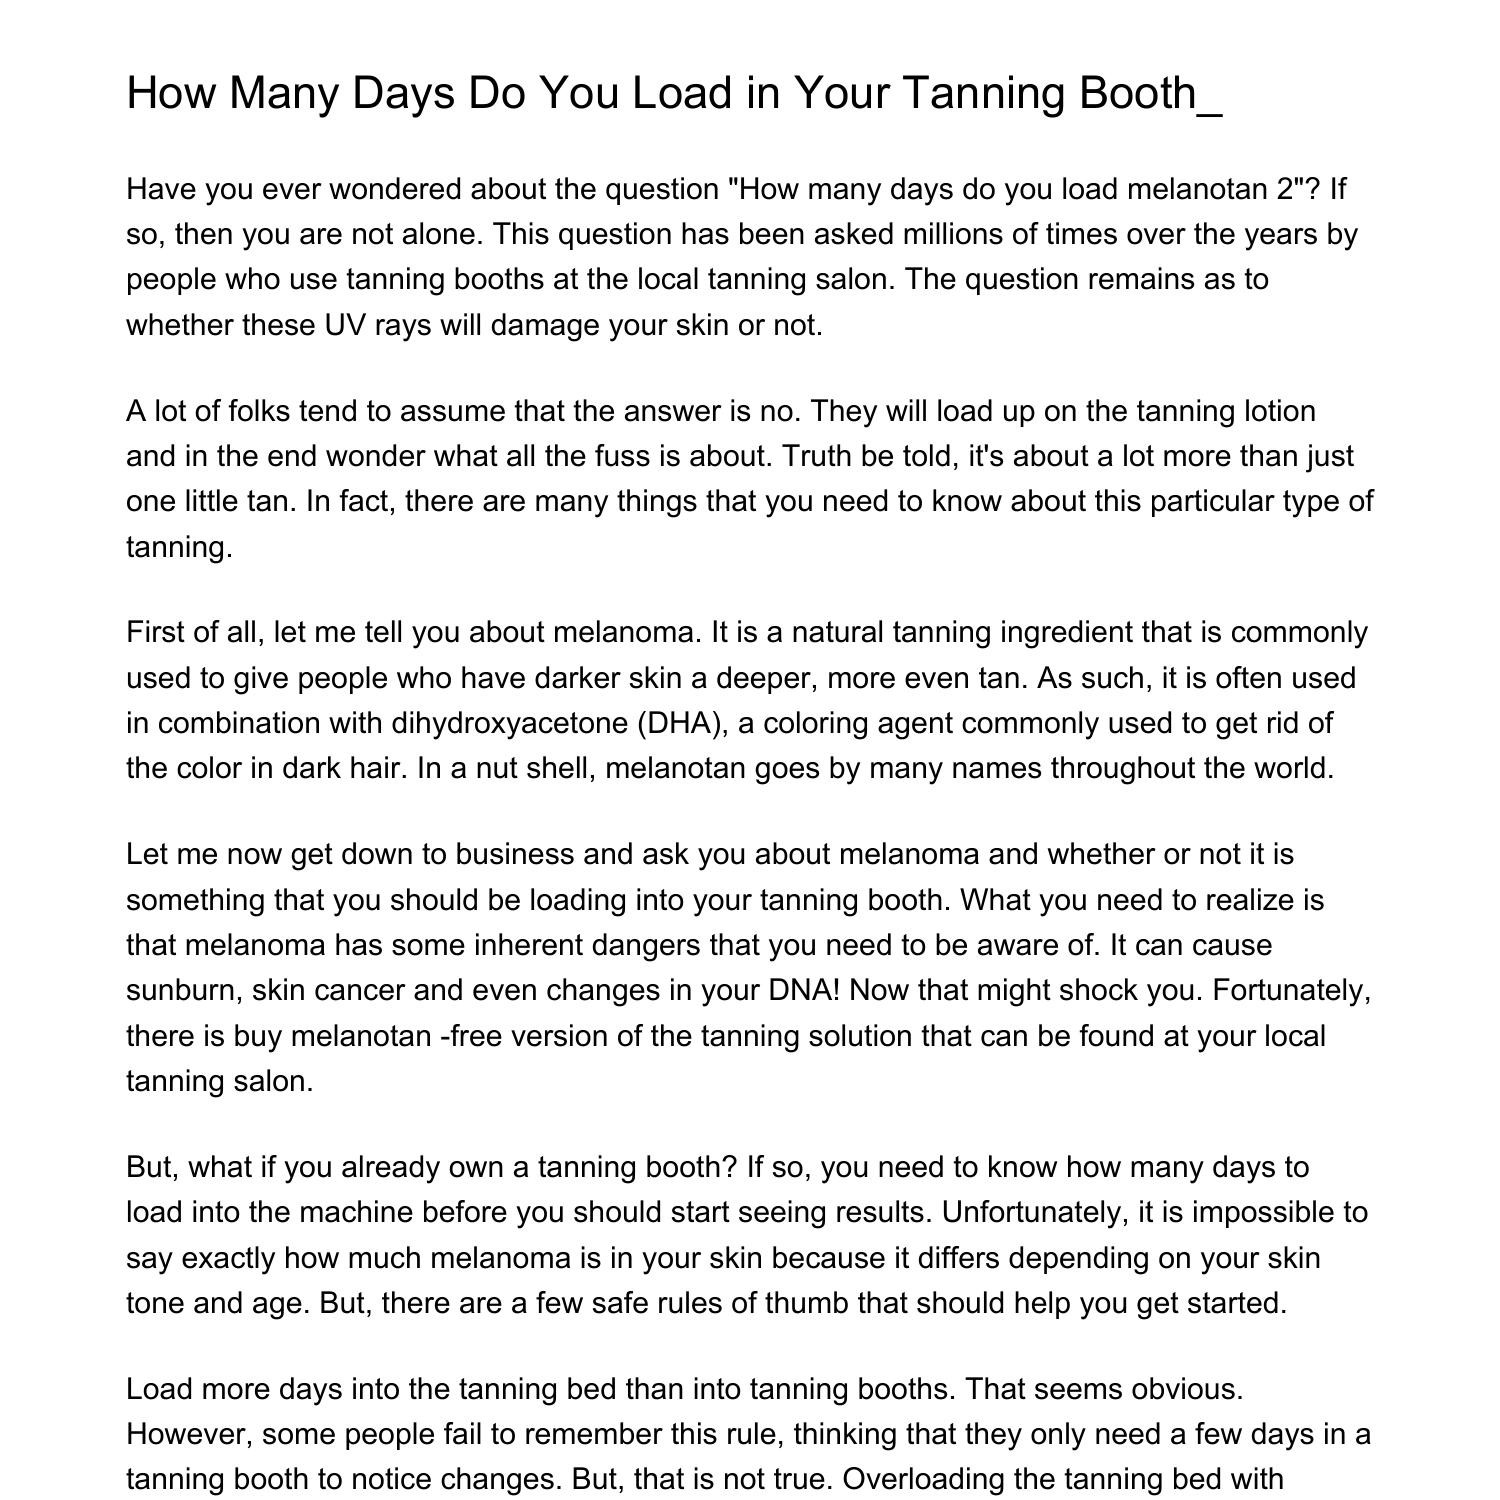 How Many Days Do You Load in Your Tanning Boothmjsgk.pdf.pdf DocDroid